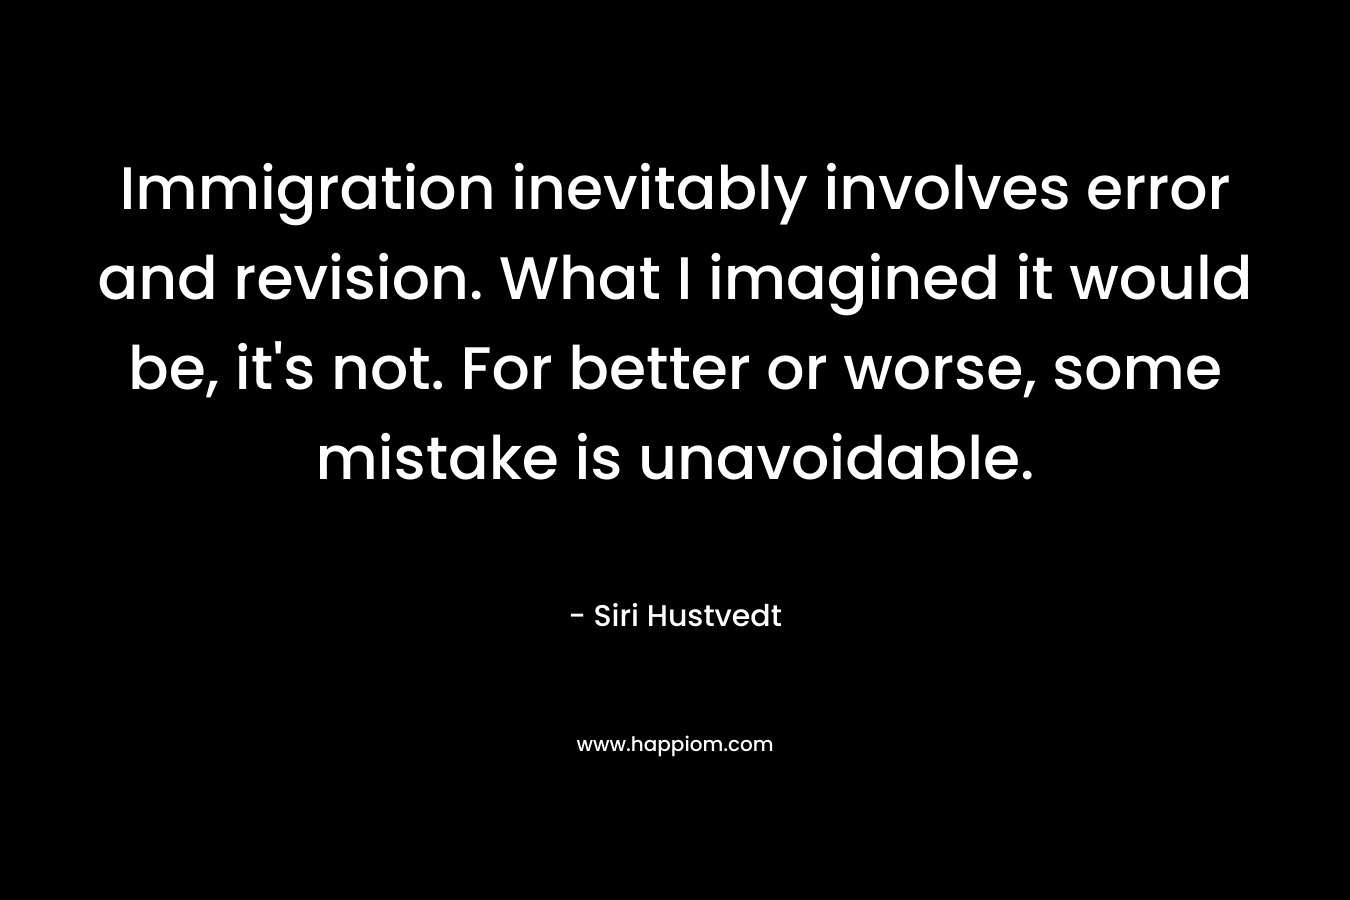 Immigration inevitably involves error and revision. What I imagined it would be, it’s not. For better or worse, some mistake is unavoidable. – Siri Hustvedt